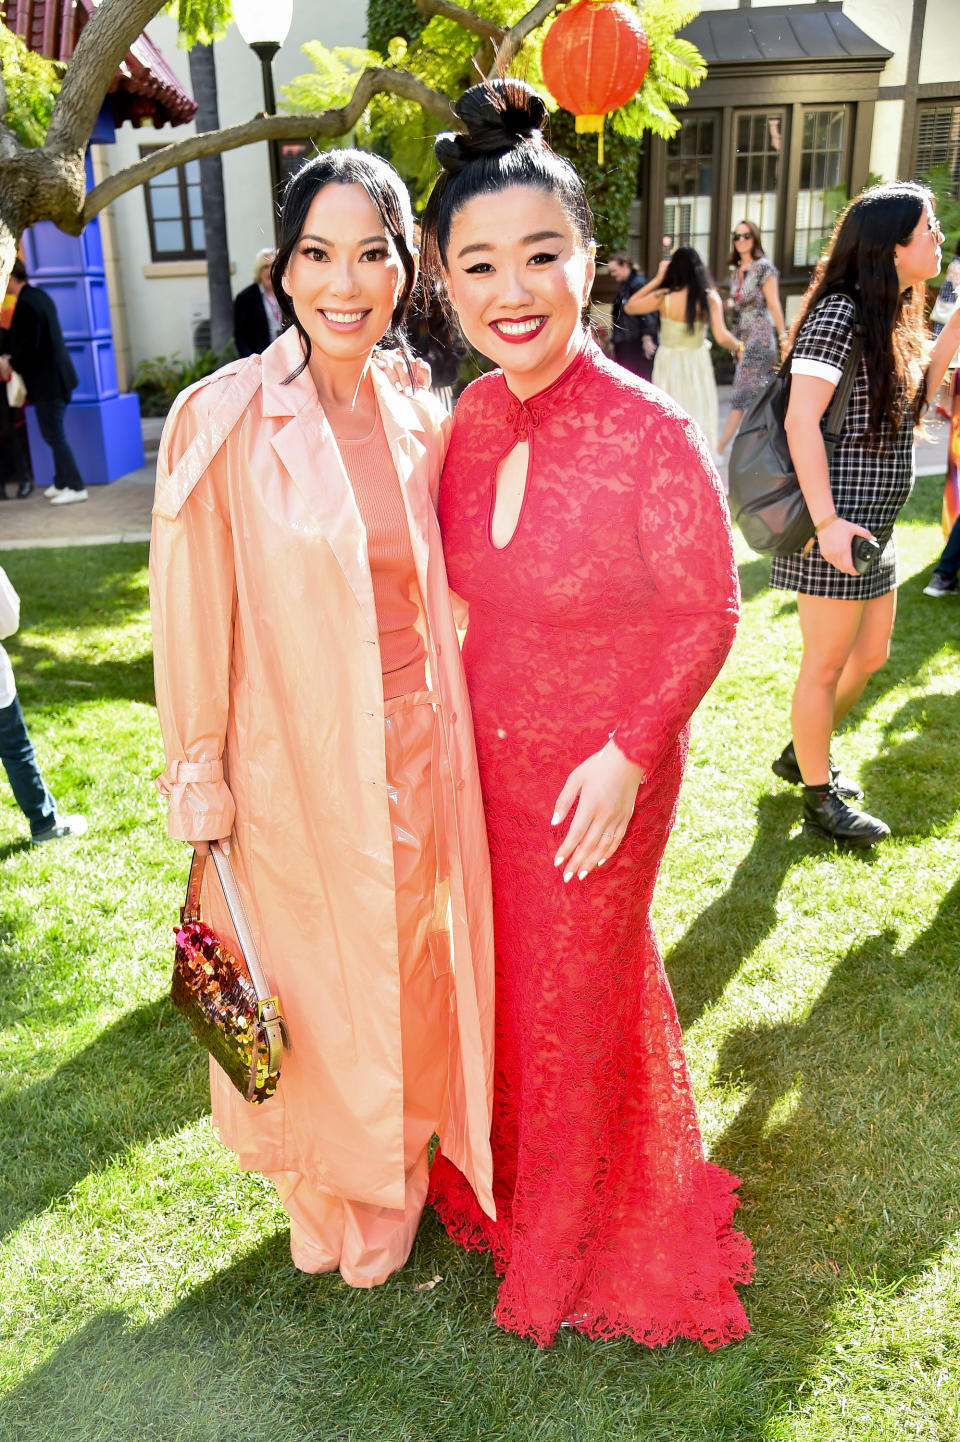 Christine Chiu and Sherry Cola at the Family Day global premiere of "The Tiger's Apprentice" held at Paramount Pictures Studio Sherry Lansing Theater on January 27, 2024 in Los Angeles, California.